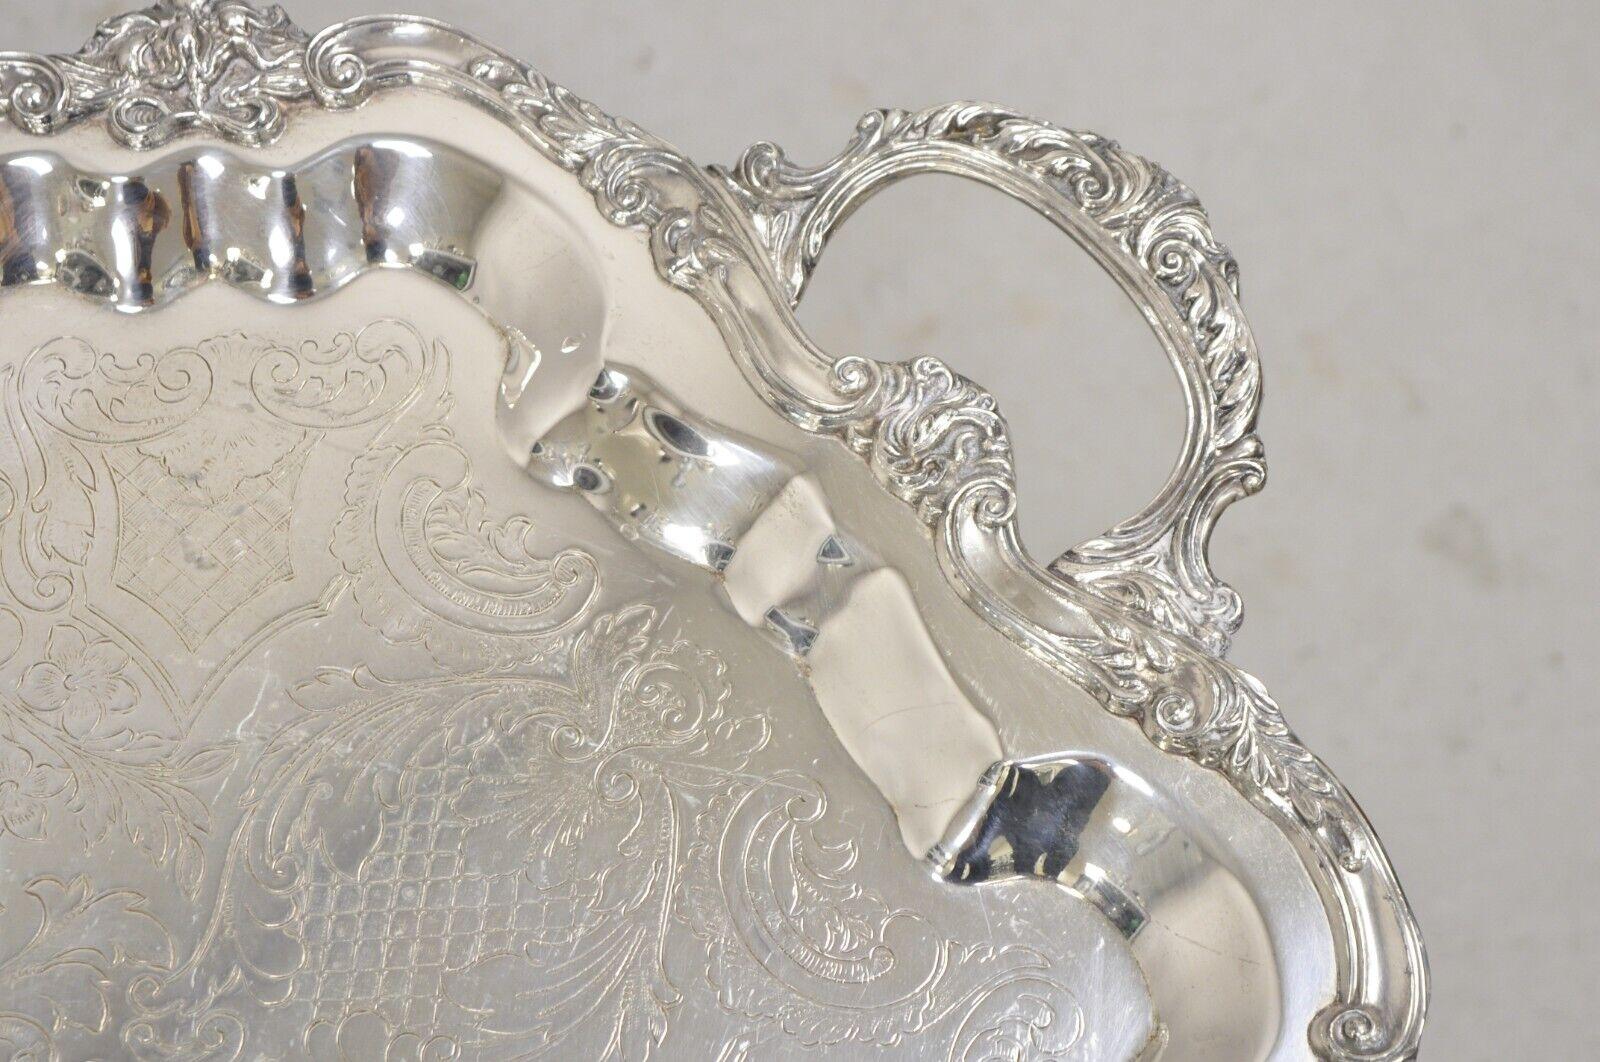 Vintage Sheridan Large Ornate Silver Plated Victorian Style Serving Platter Tray For Sale 1